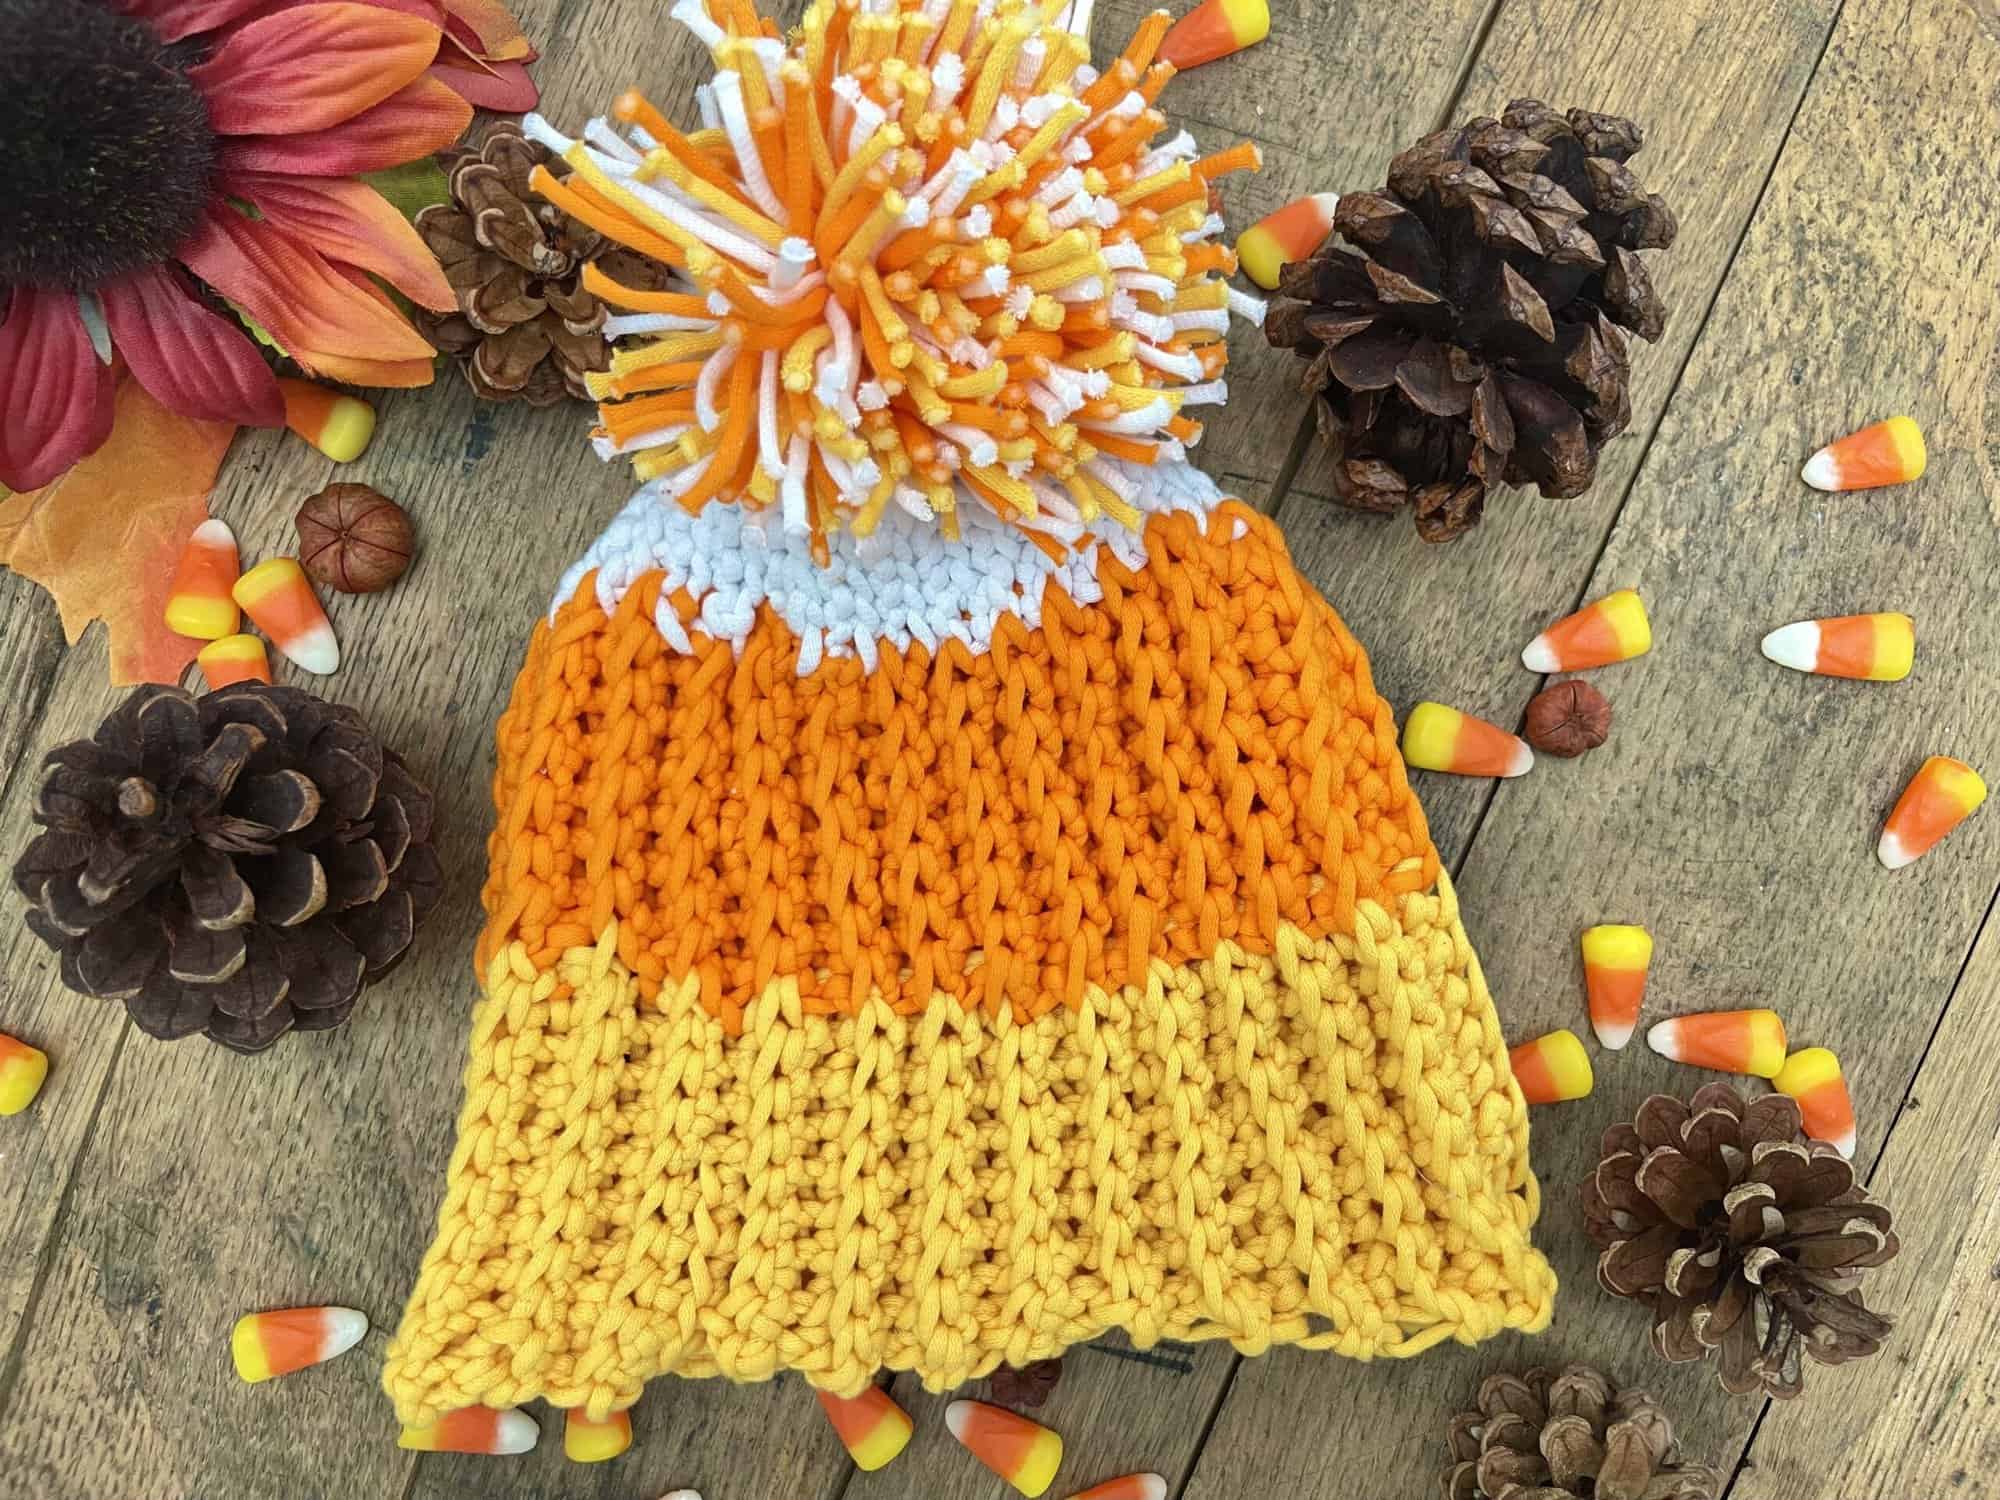 How to Make a Pompom for a Hat (So Easy!) - DIY Candy